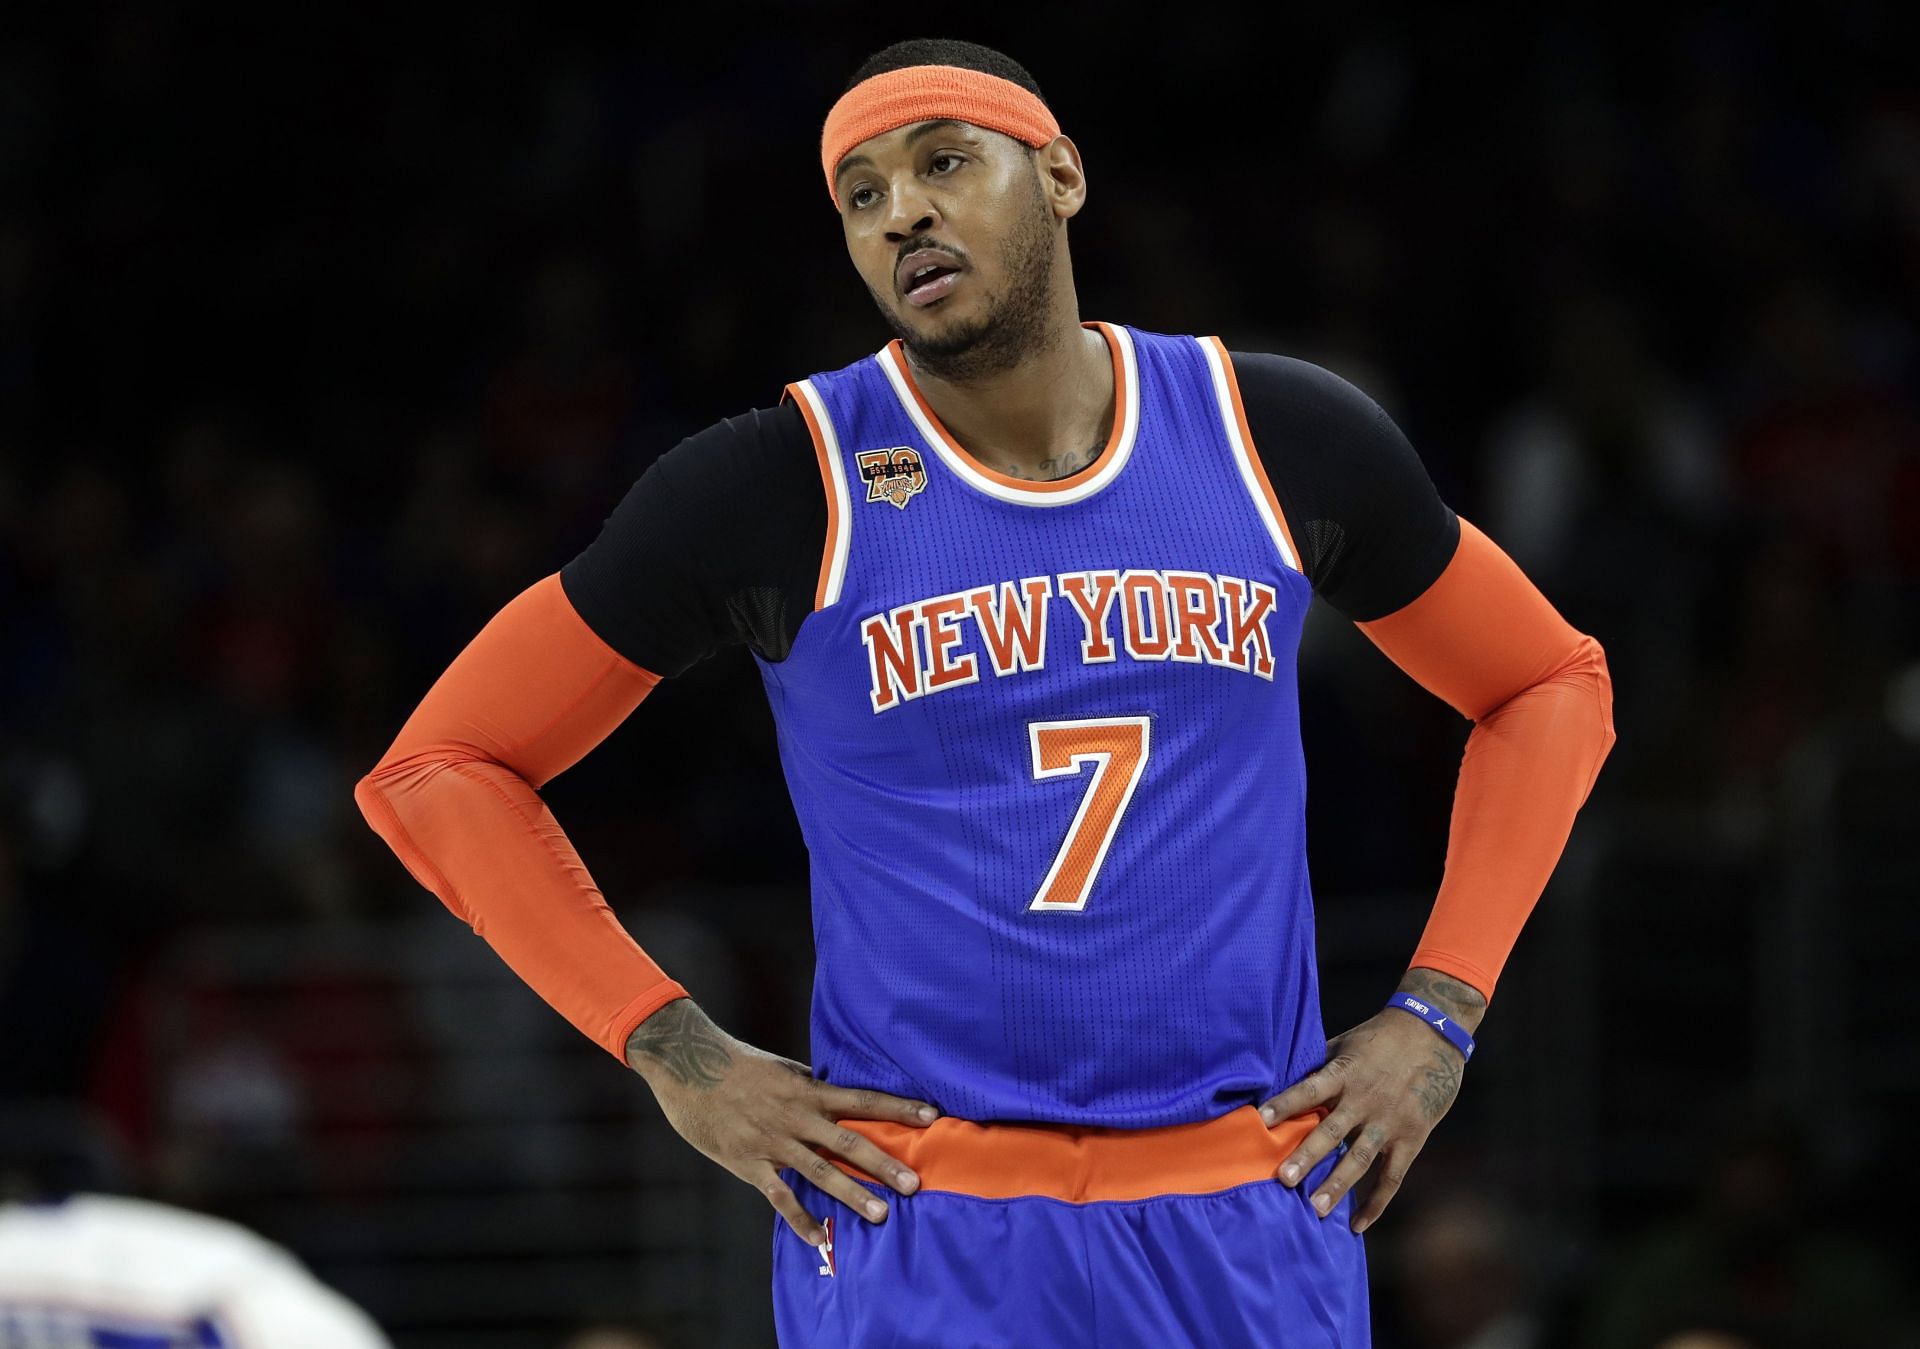 The injuries started piling up for Carmelo Anthony in 2011